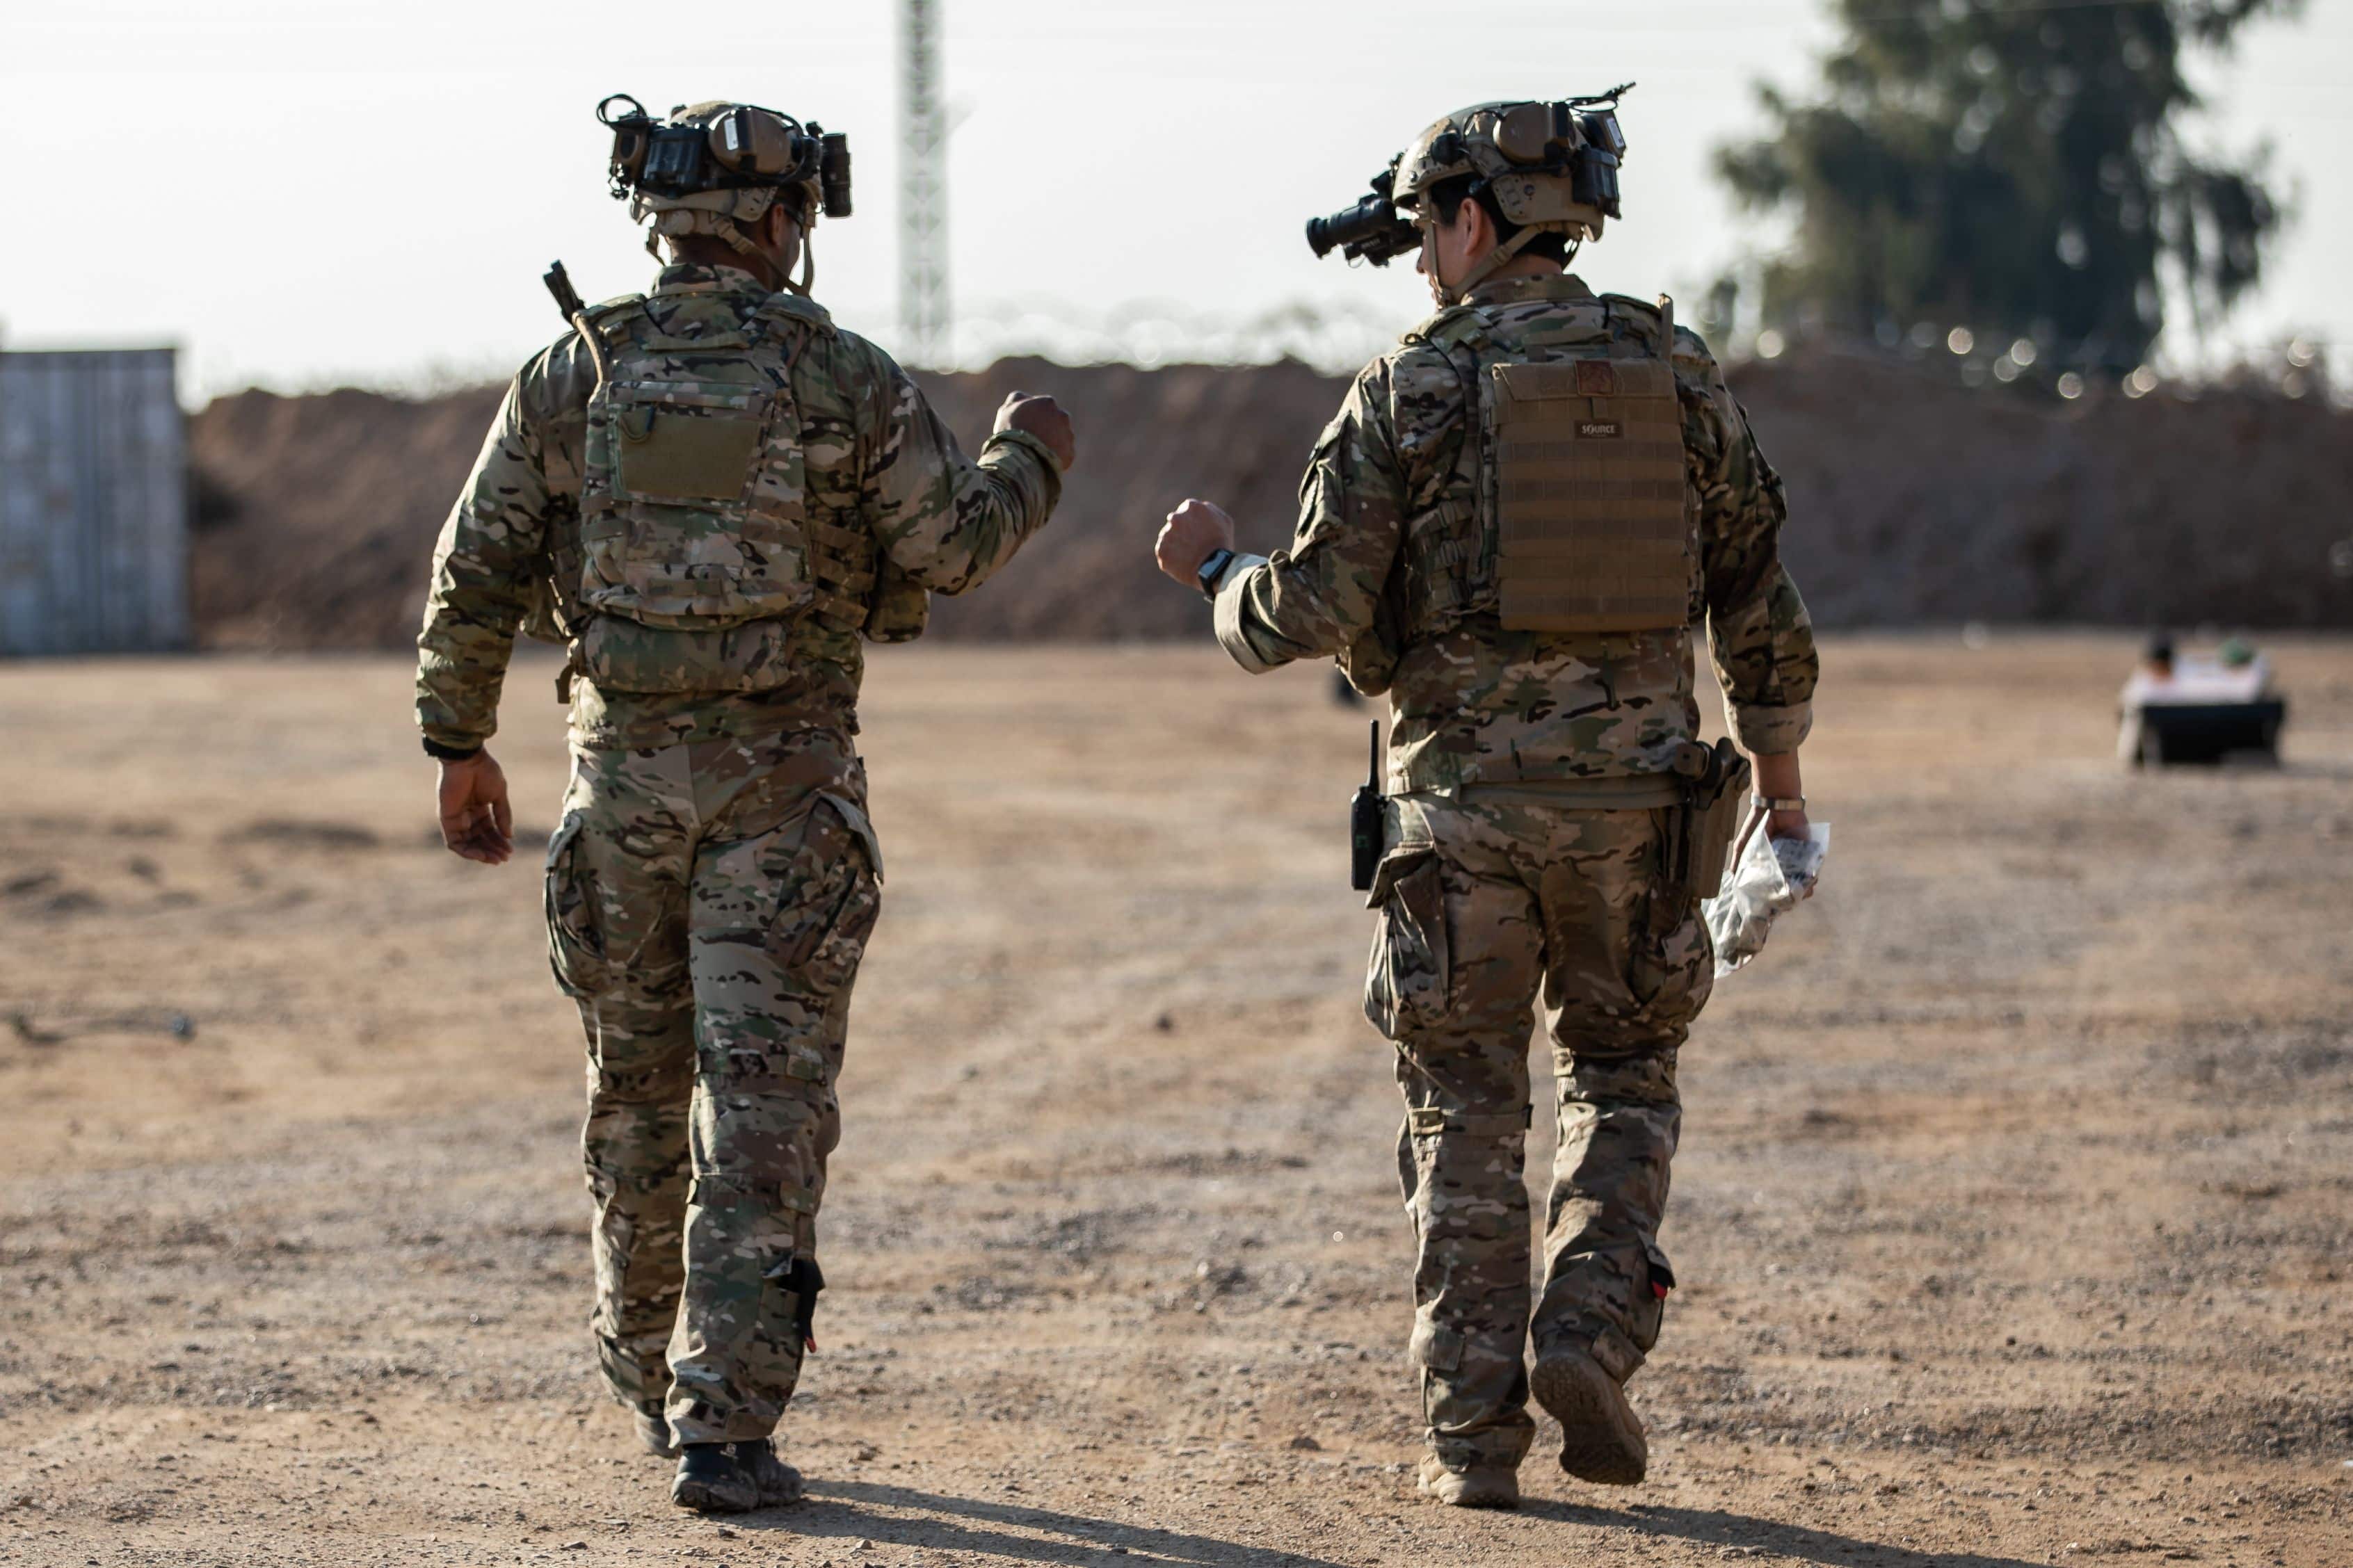 U.S. Army Sgt. Adrien Cox, left, and Staff Sgt. Jake Hankins, right, both assigned to the 717th Ordnance Company, share a fist bump during an operation with Syrian Democratic Forces in the ar-Raqqah region